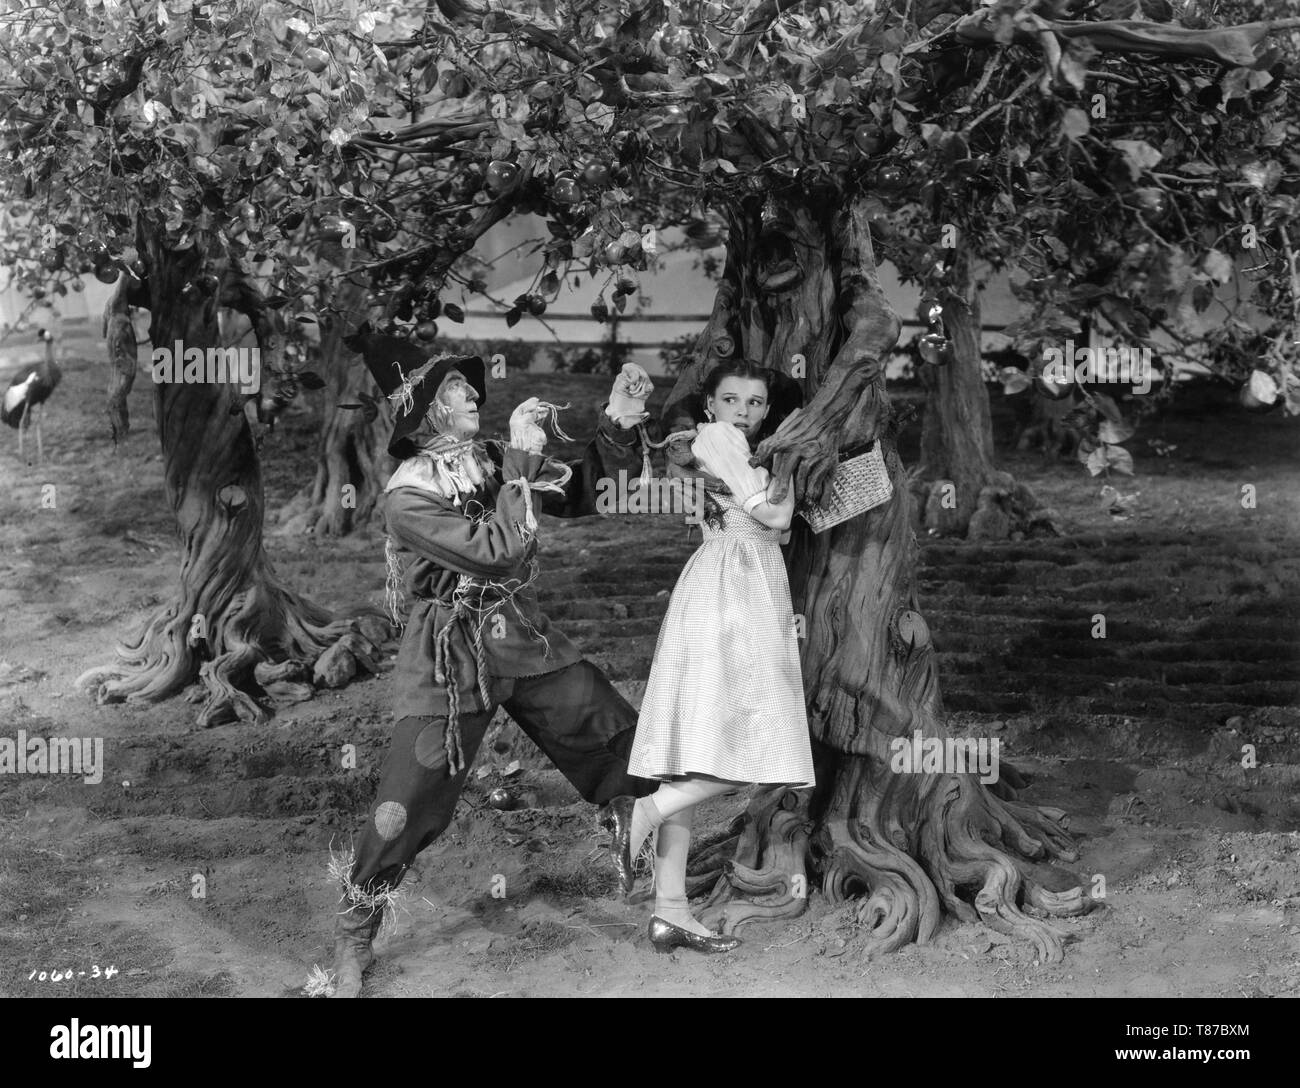 RAY BOLGER as Scarecrow JUDY GARLAND as Dorothy Gale THE WIZARD OF OZ 1939 director Victor Fleming book Frank L. Baum Metro Goldwyn Mayer Stock Photo